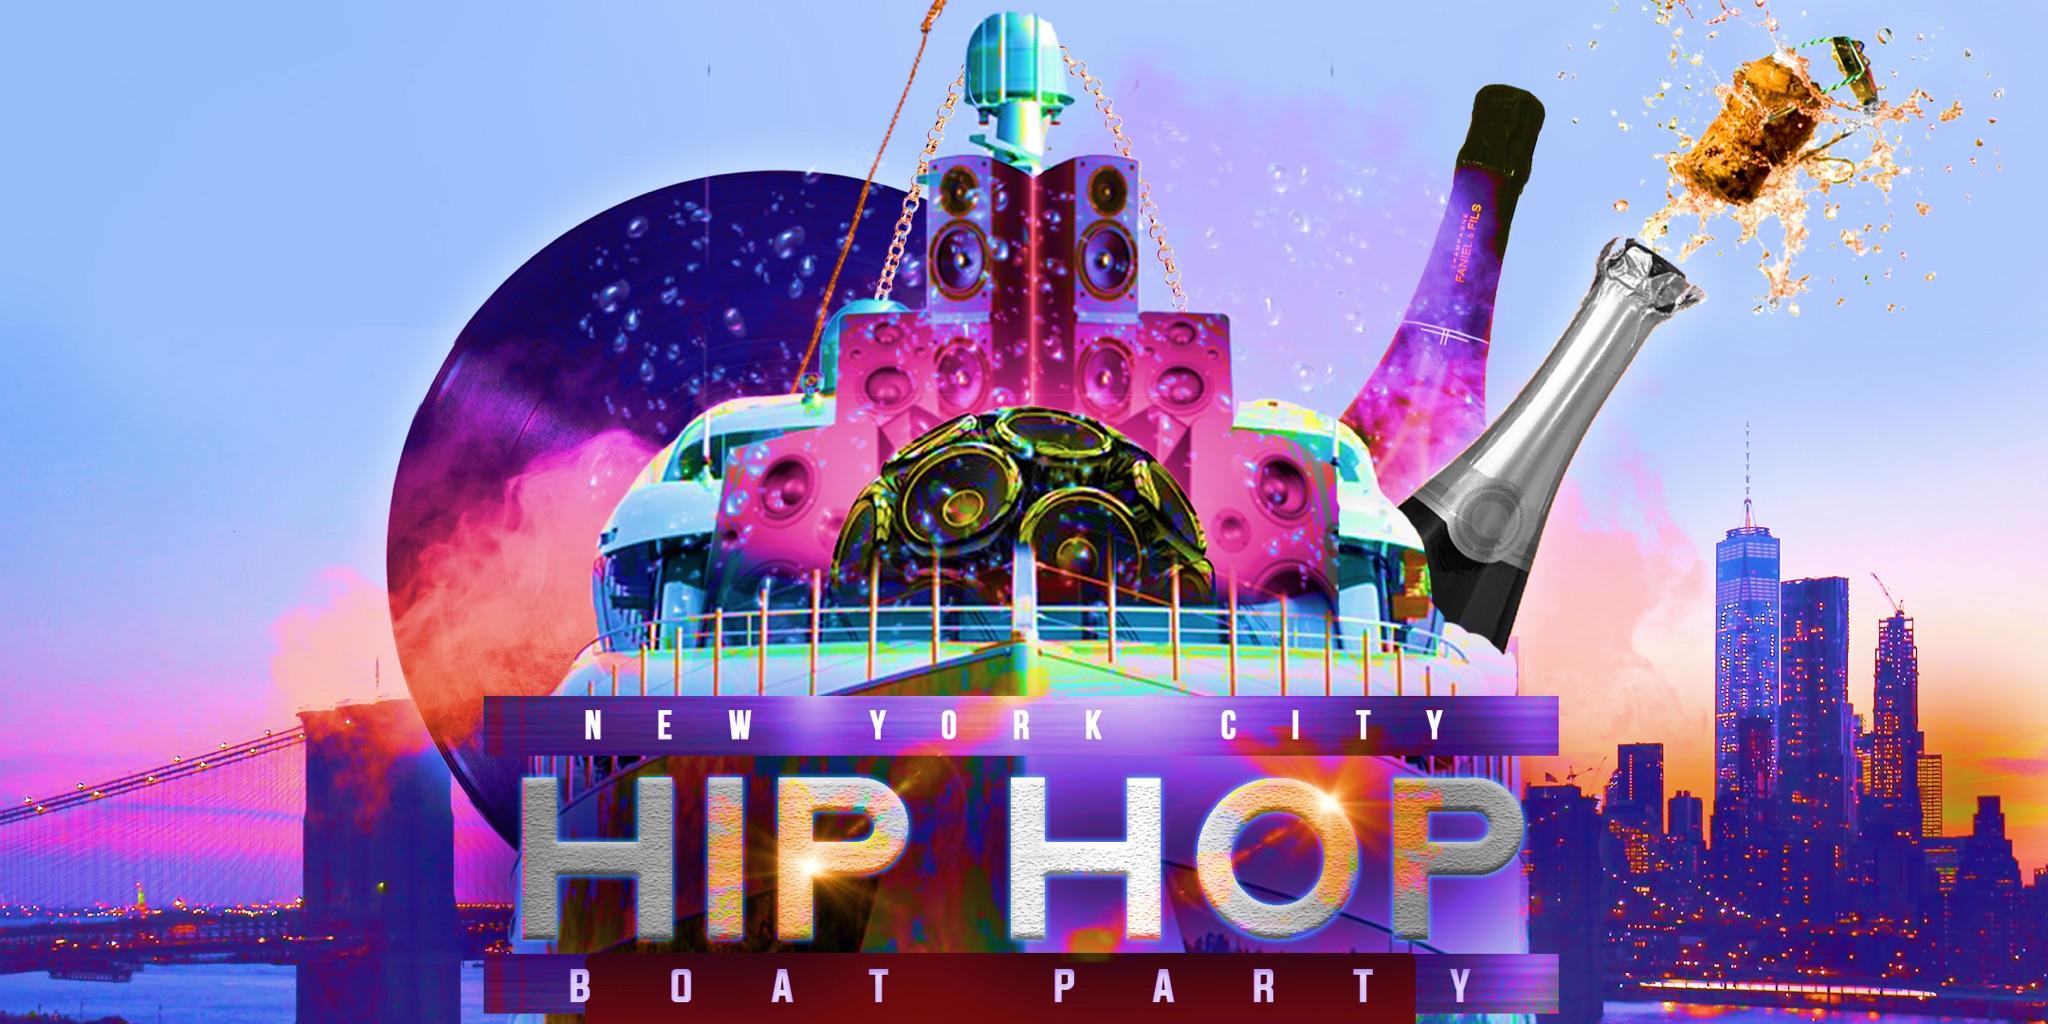 The #1 HIP HOP & R&B Boat Party NYC Yacht Cruise: Saturday Night 